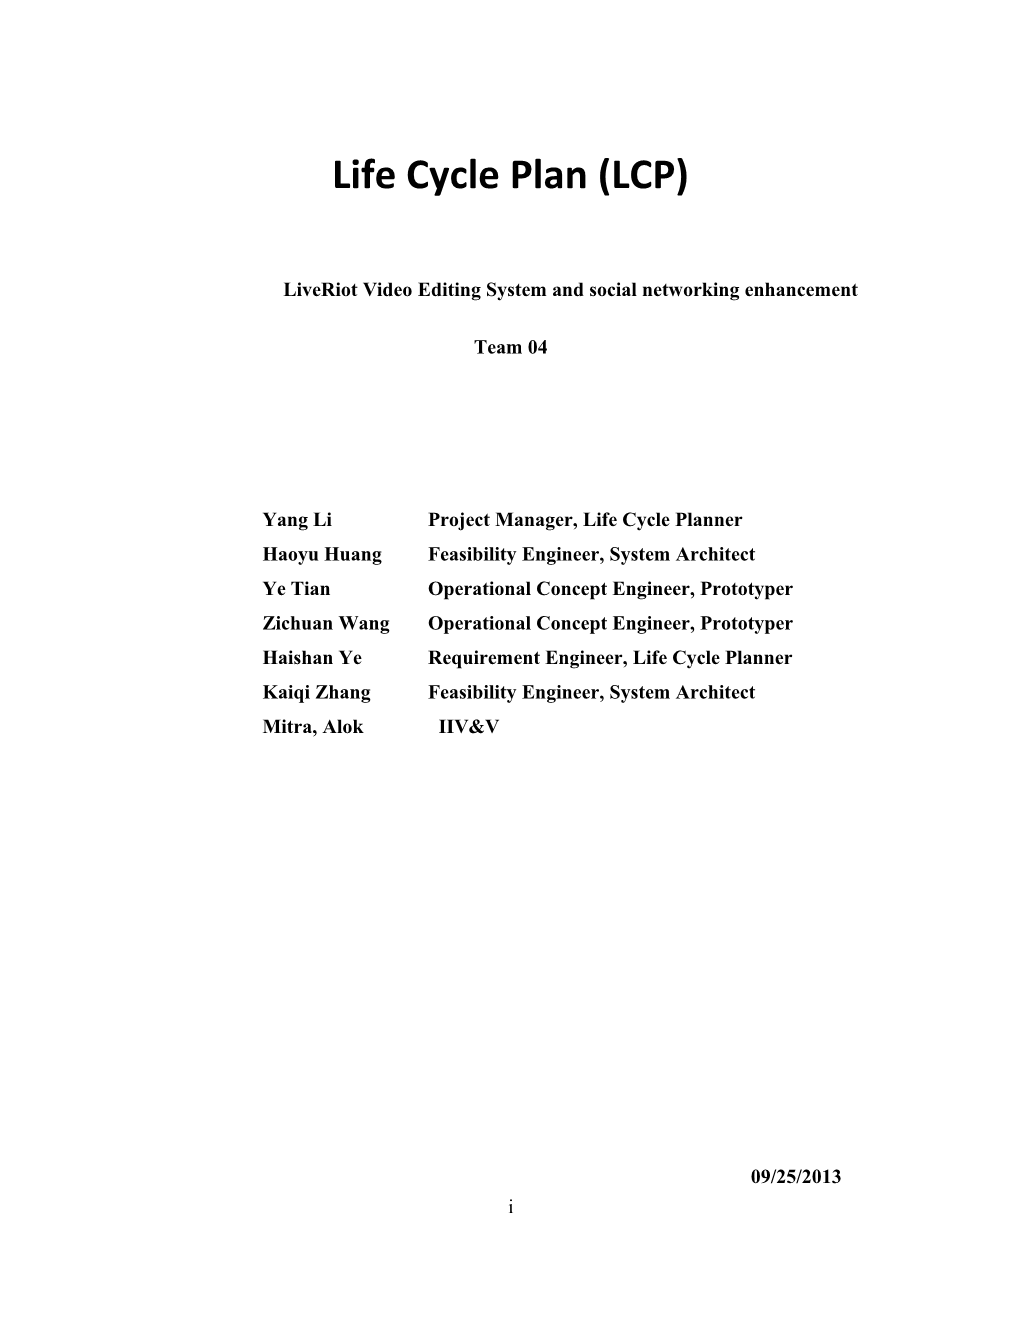 Life Cycle Plan (LCP) s3